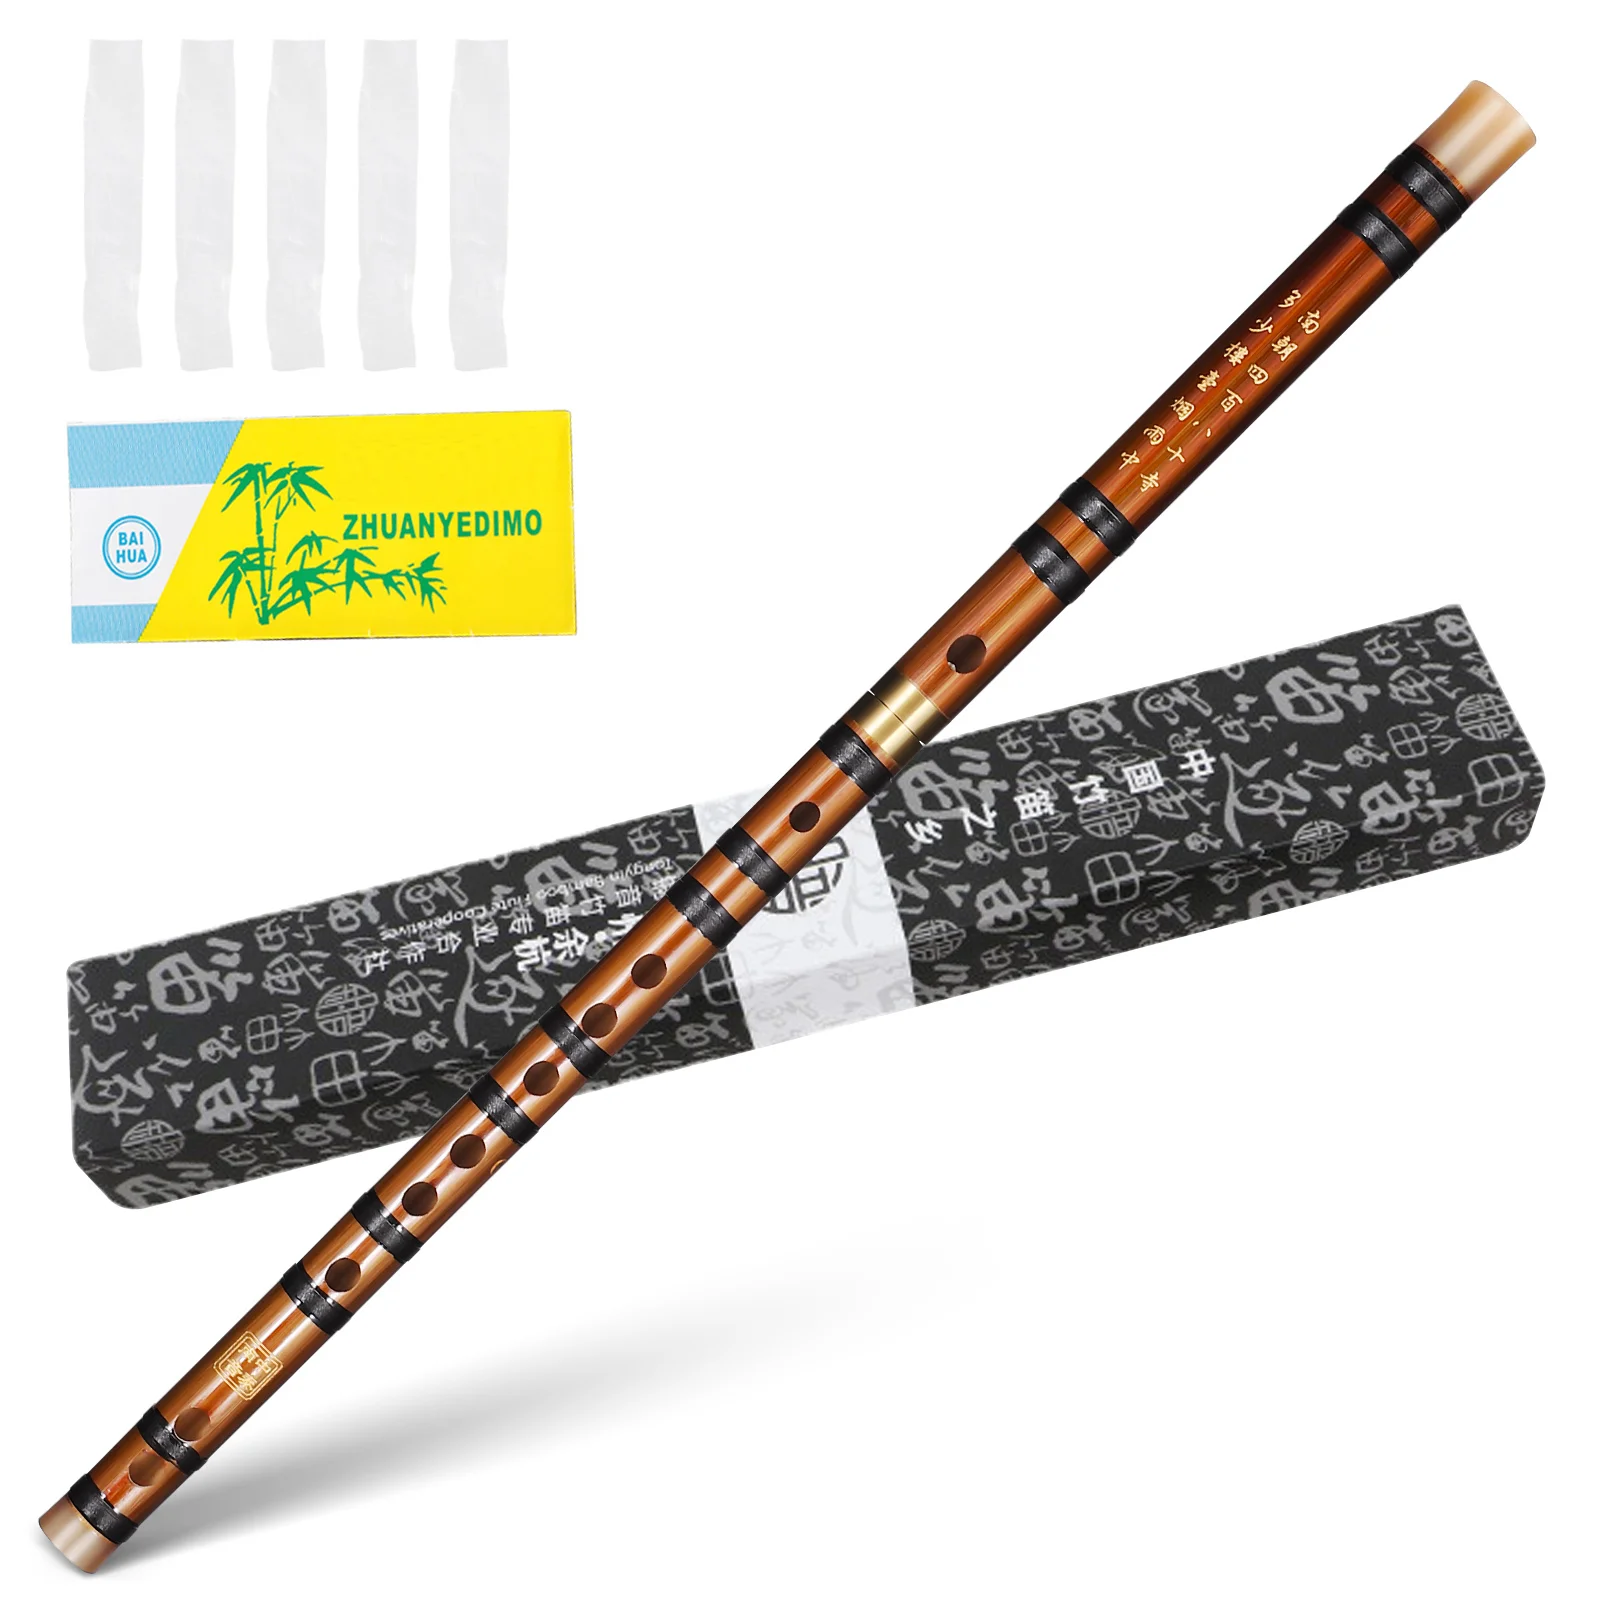 

G Key Bamboo Flute Instruments G-key Kids Musical Aldult Orchestral Accompaniment Premium Bitter Students Child Adults